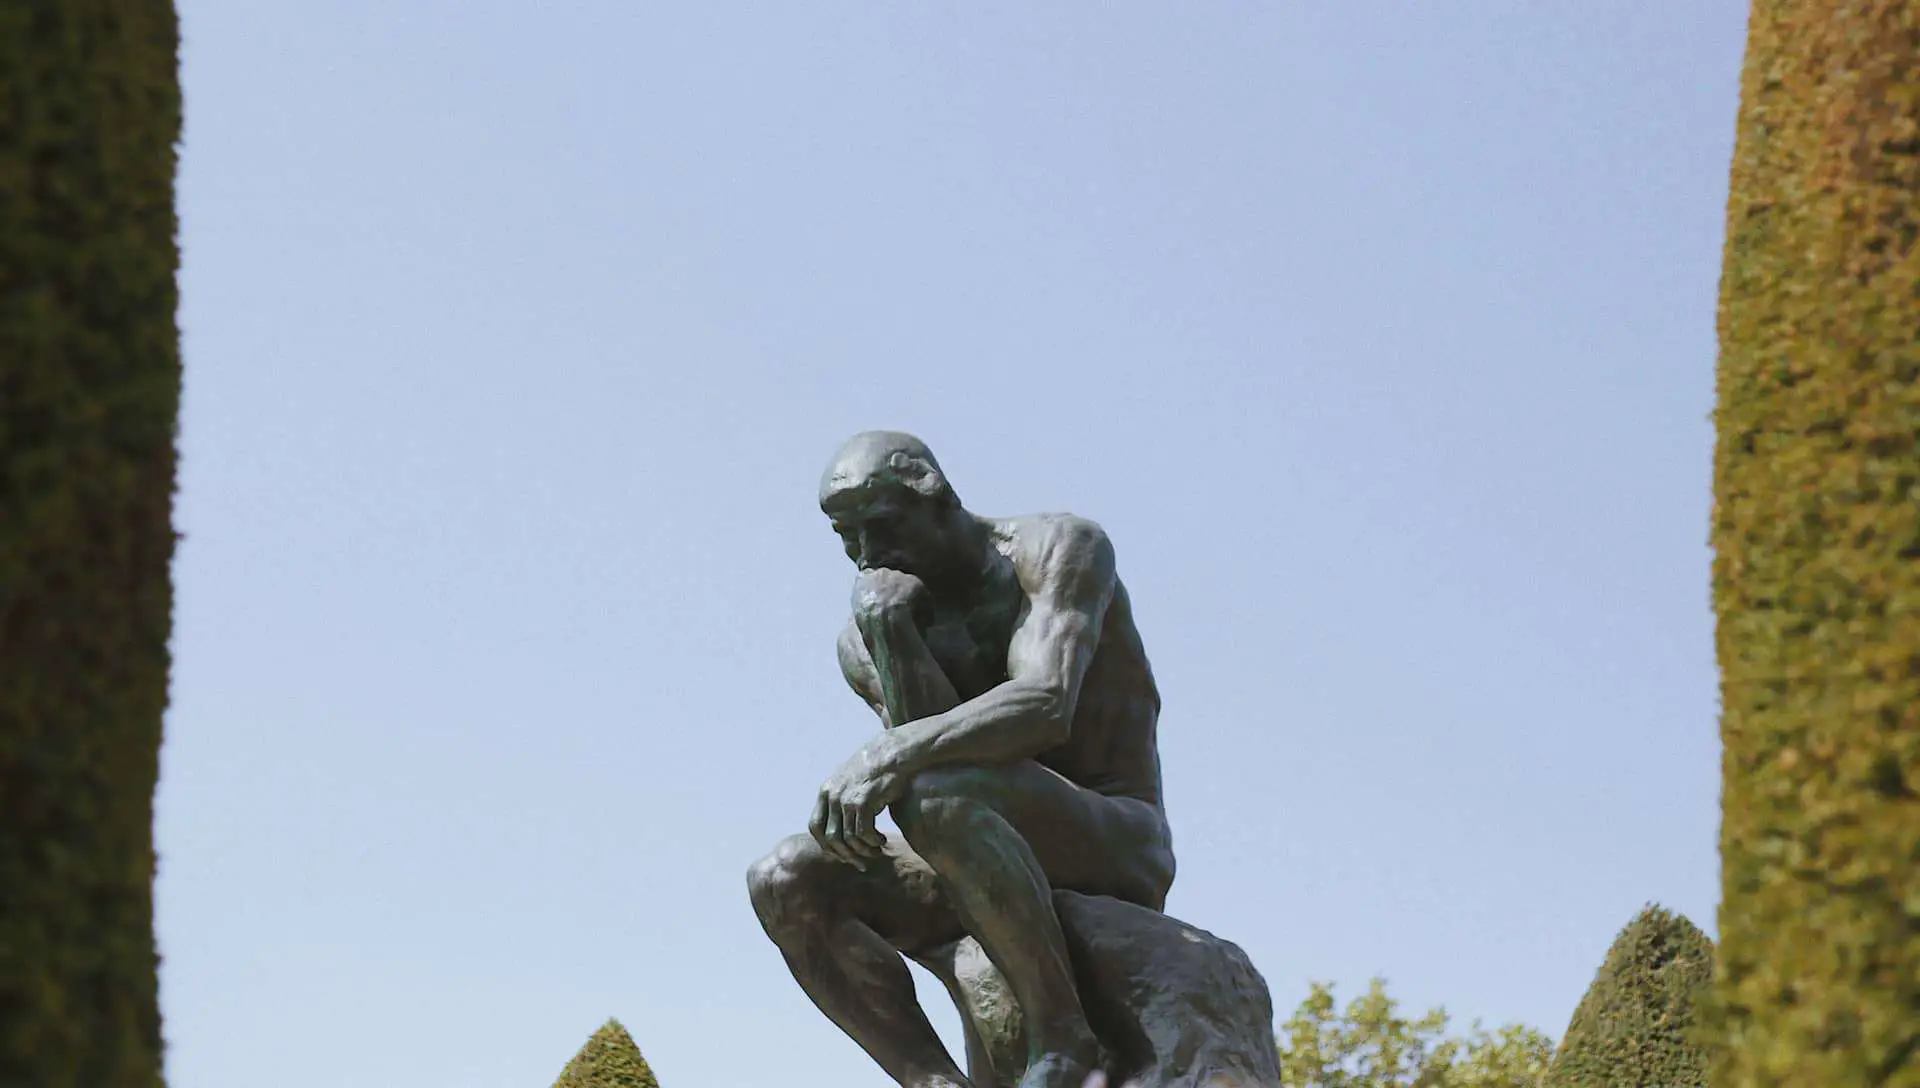 The thinker statue in a manicured garden